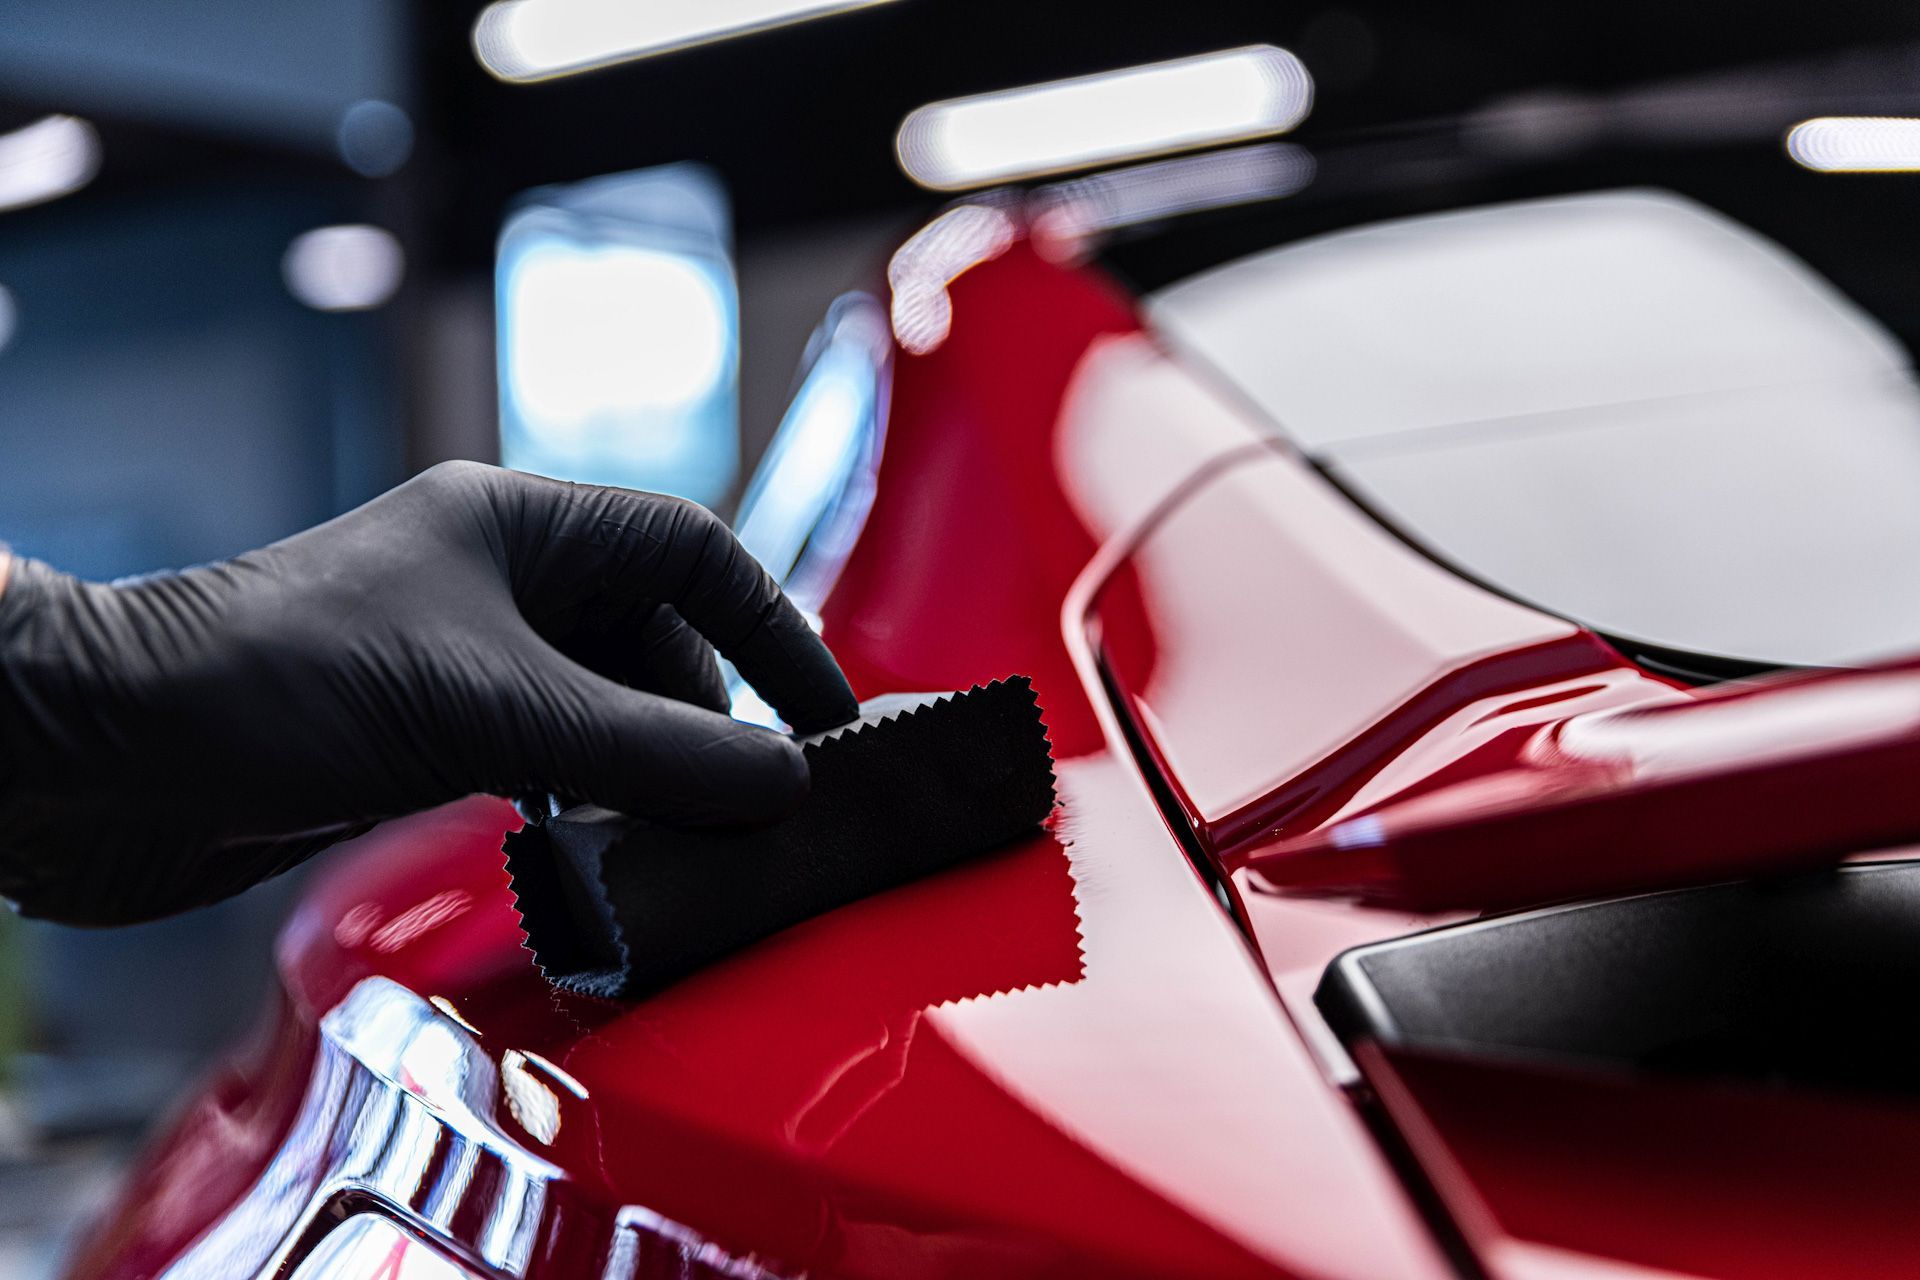 A person wearing black gloves is polishing a red car.